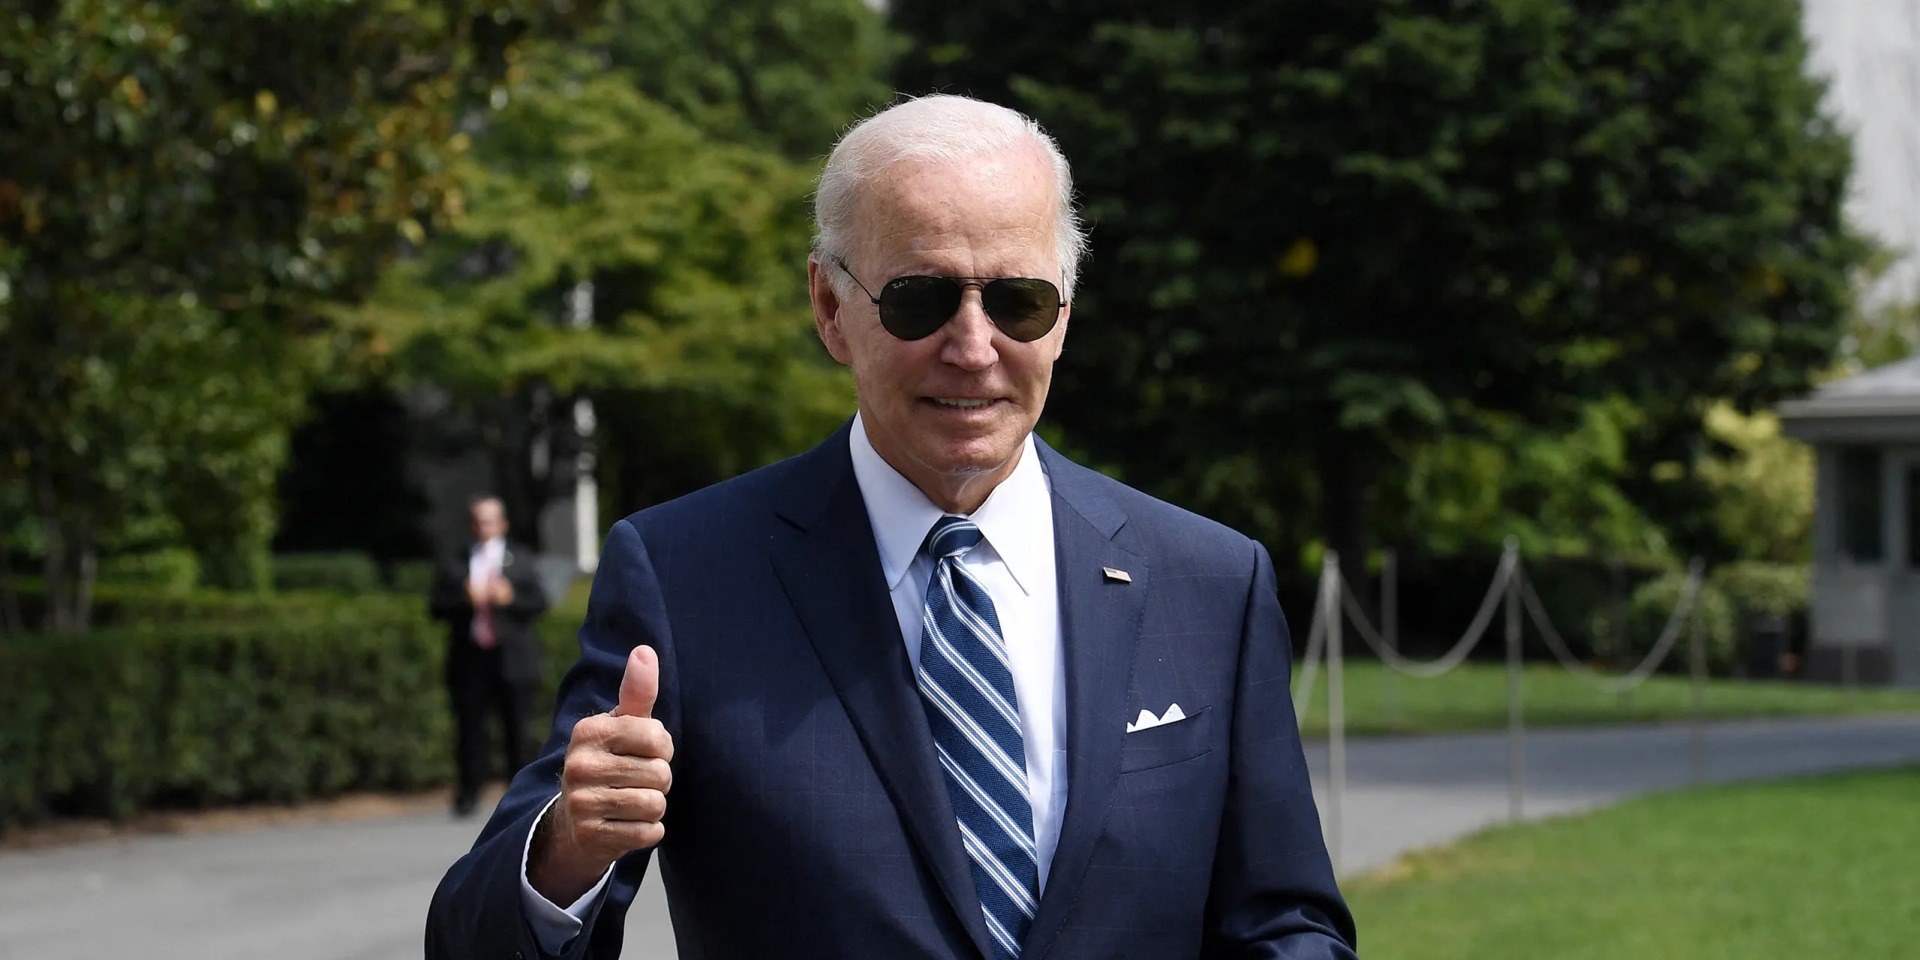 US Supreme Court Begins Hearings on Biden's Student Debt Relief Plan: What's at Stake?